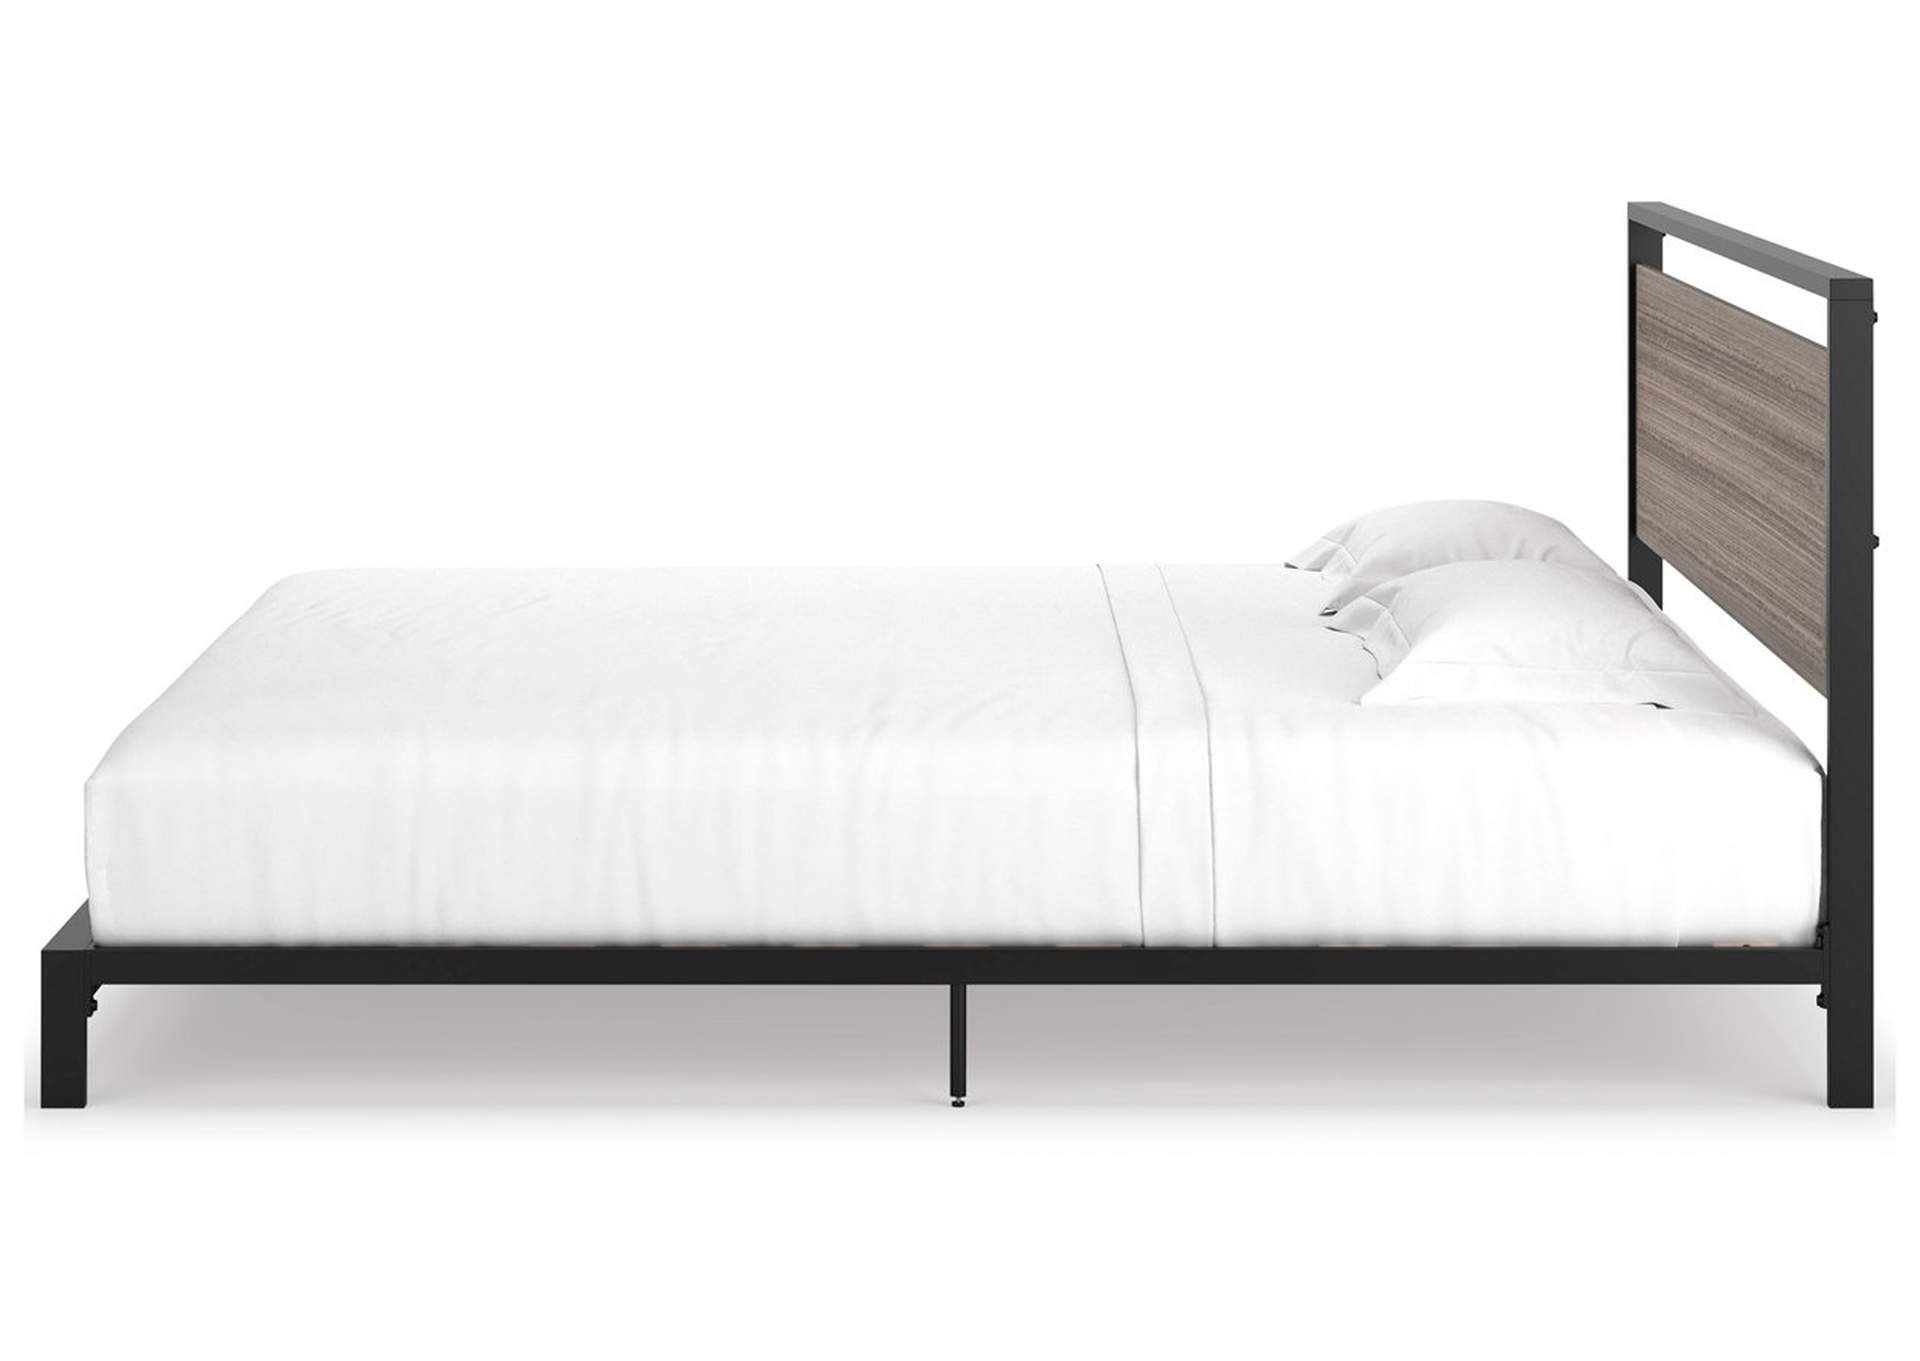 Dontally King Platform Bed,Signature Design By Ashley